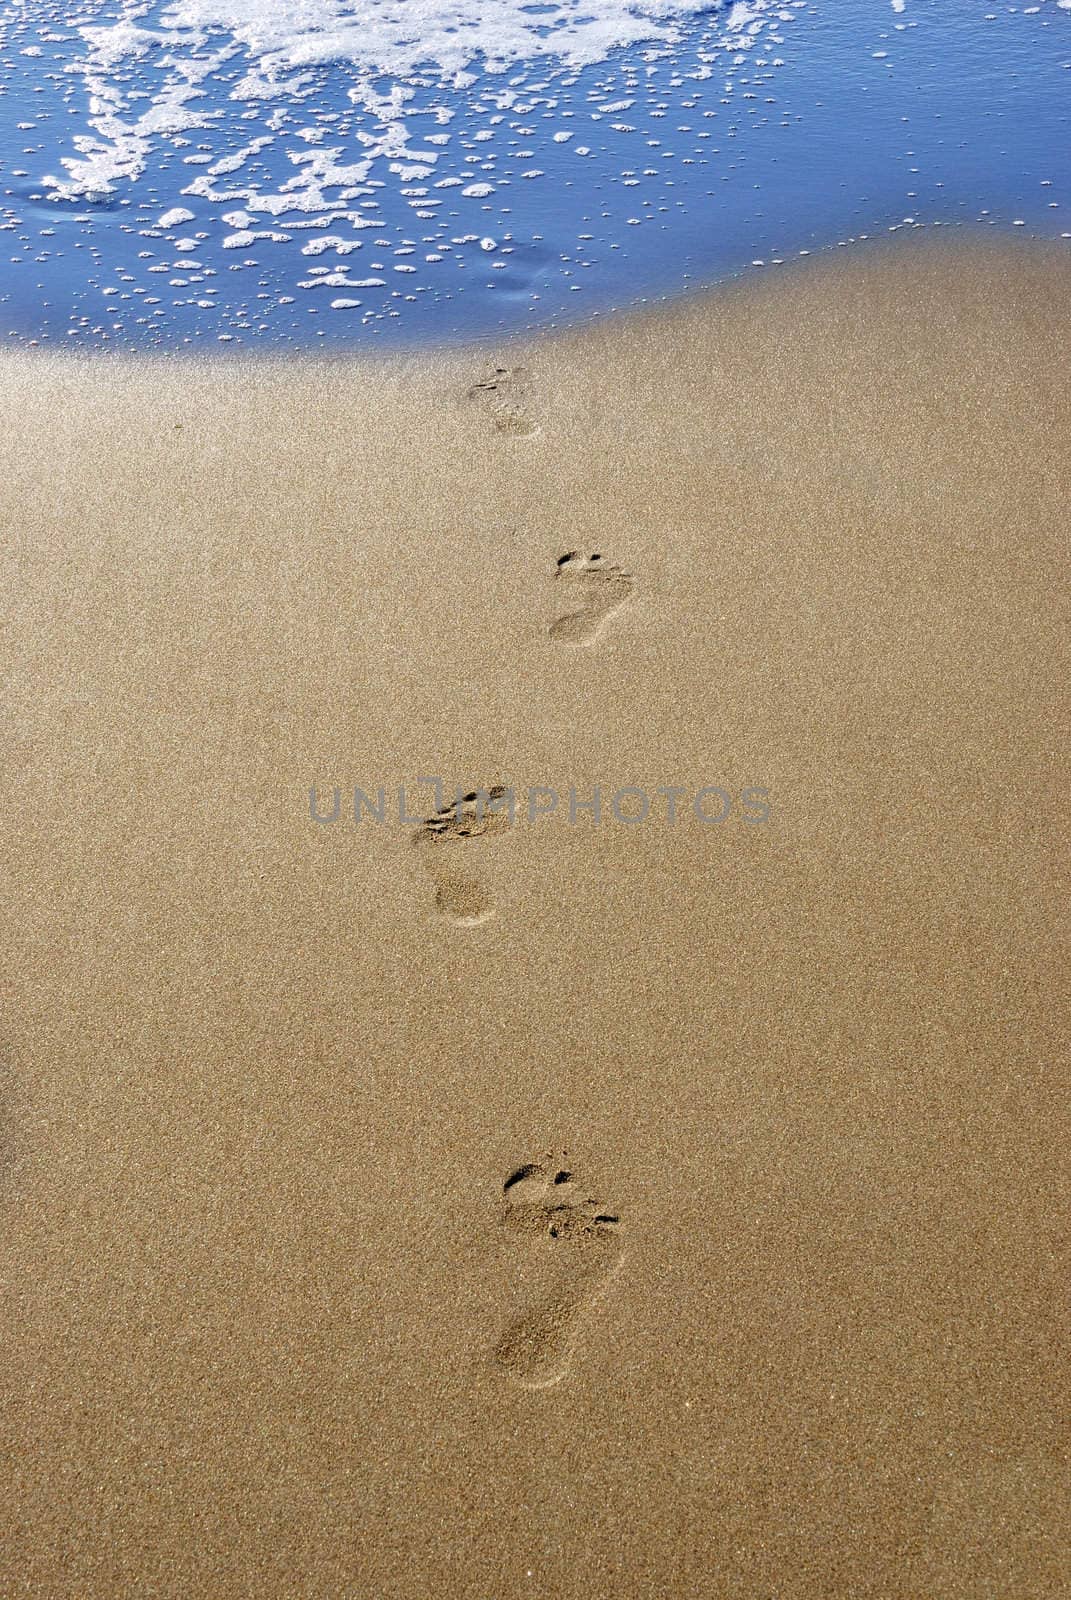 Footprints in sand by whitechild